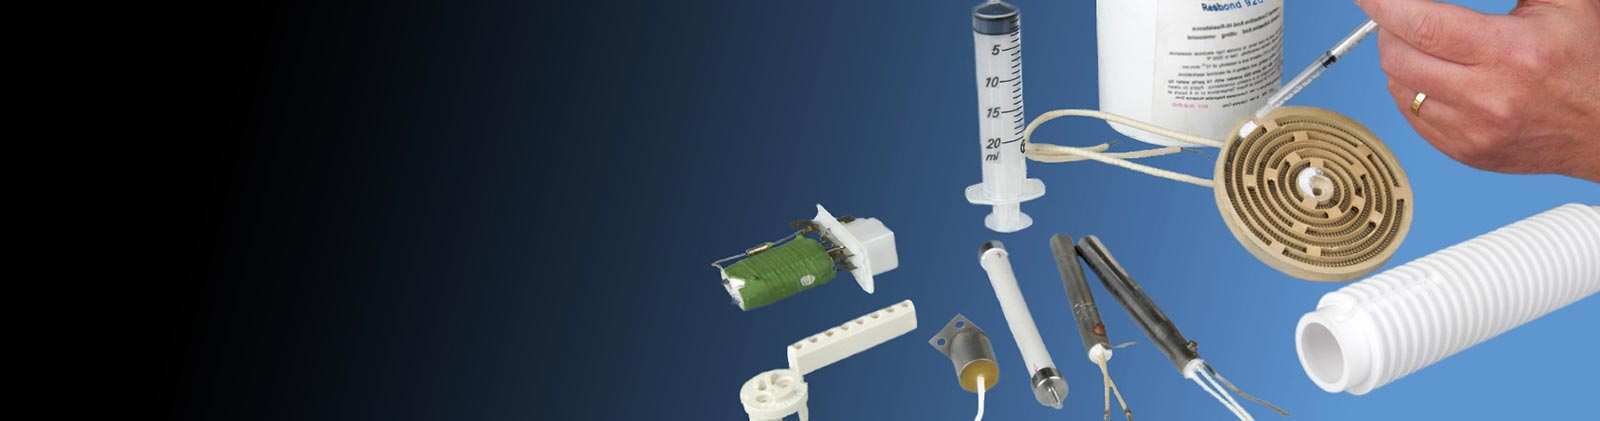 Our range of high-temperature adhesives for applications from 200°C to over 2000°C.